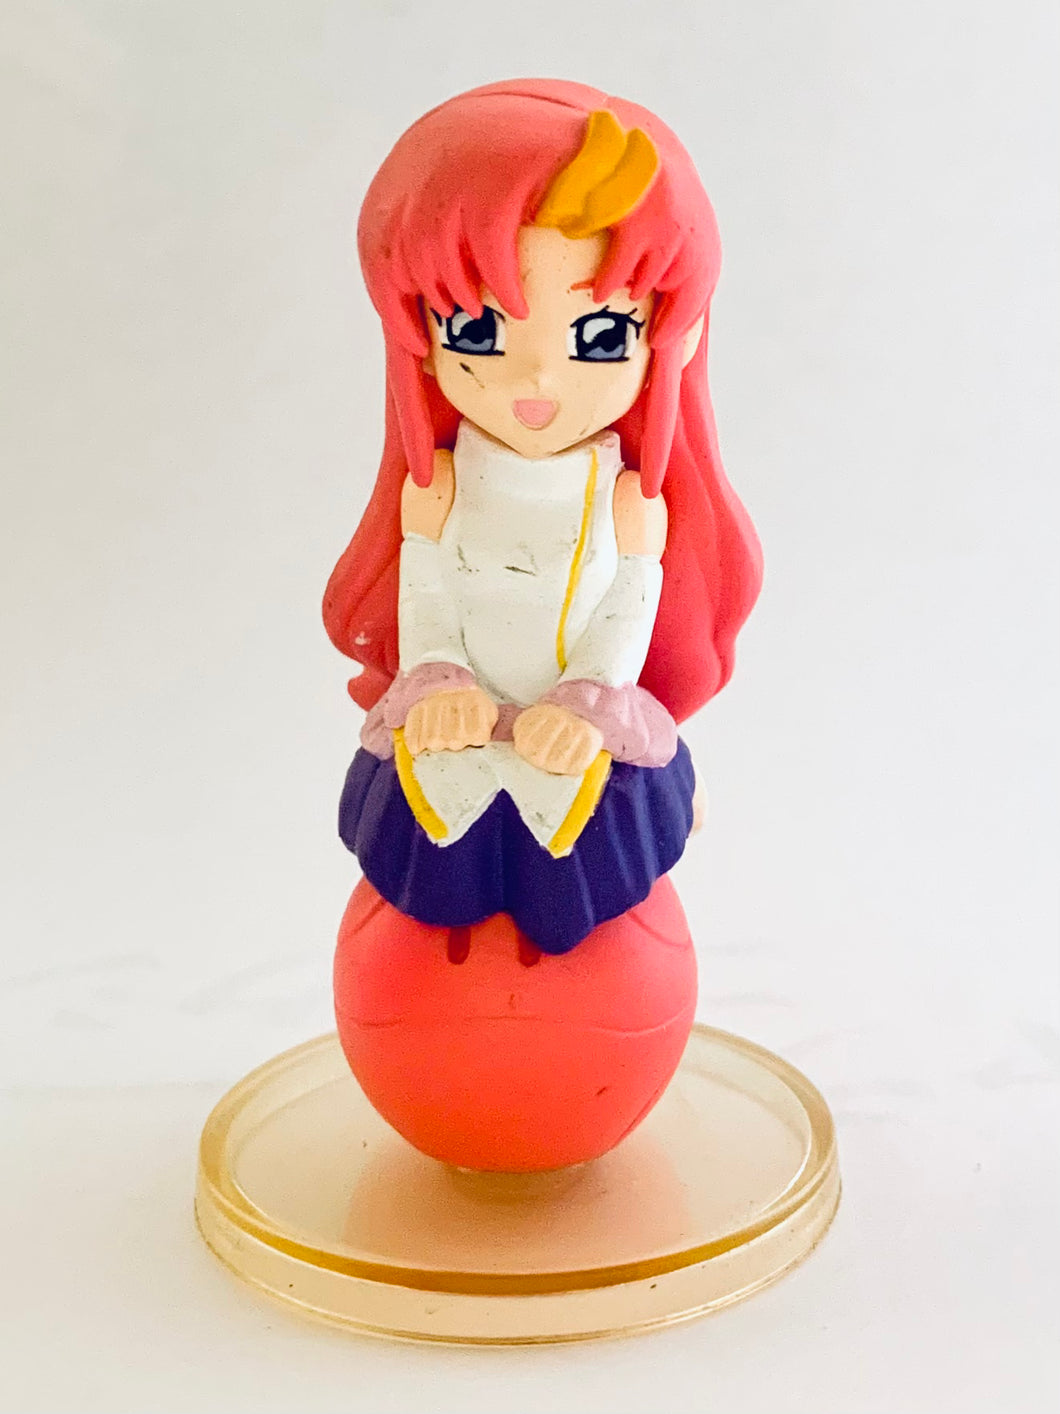 Mobile Suit Gundam SEED - Lacus Clyne - Chara Puchi - Trading Figure